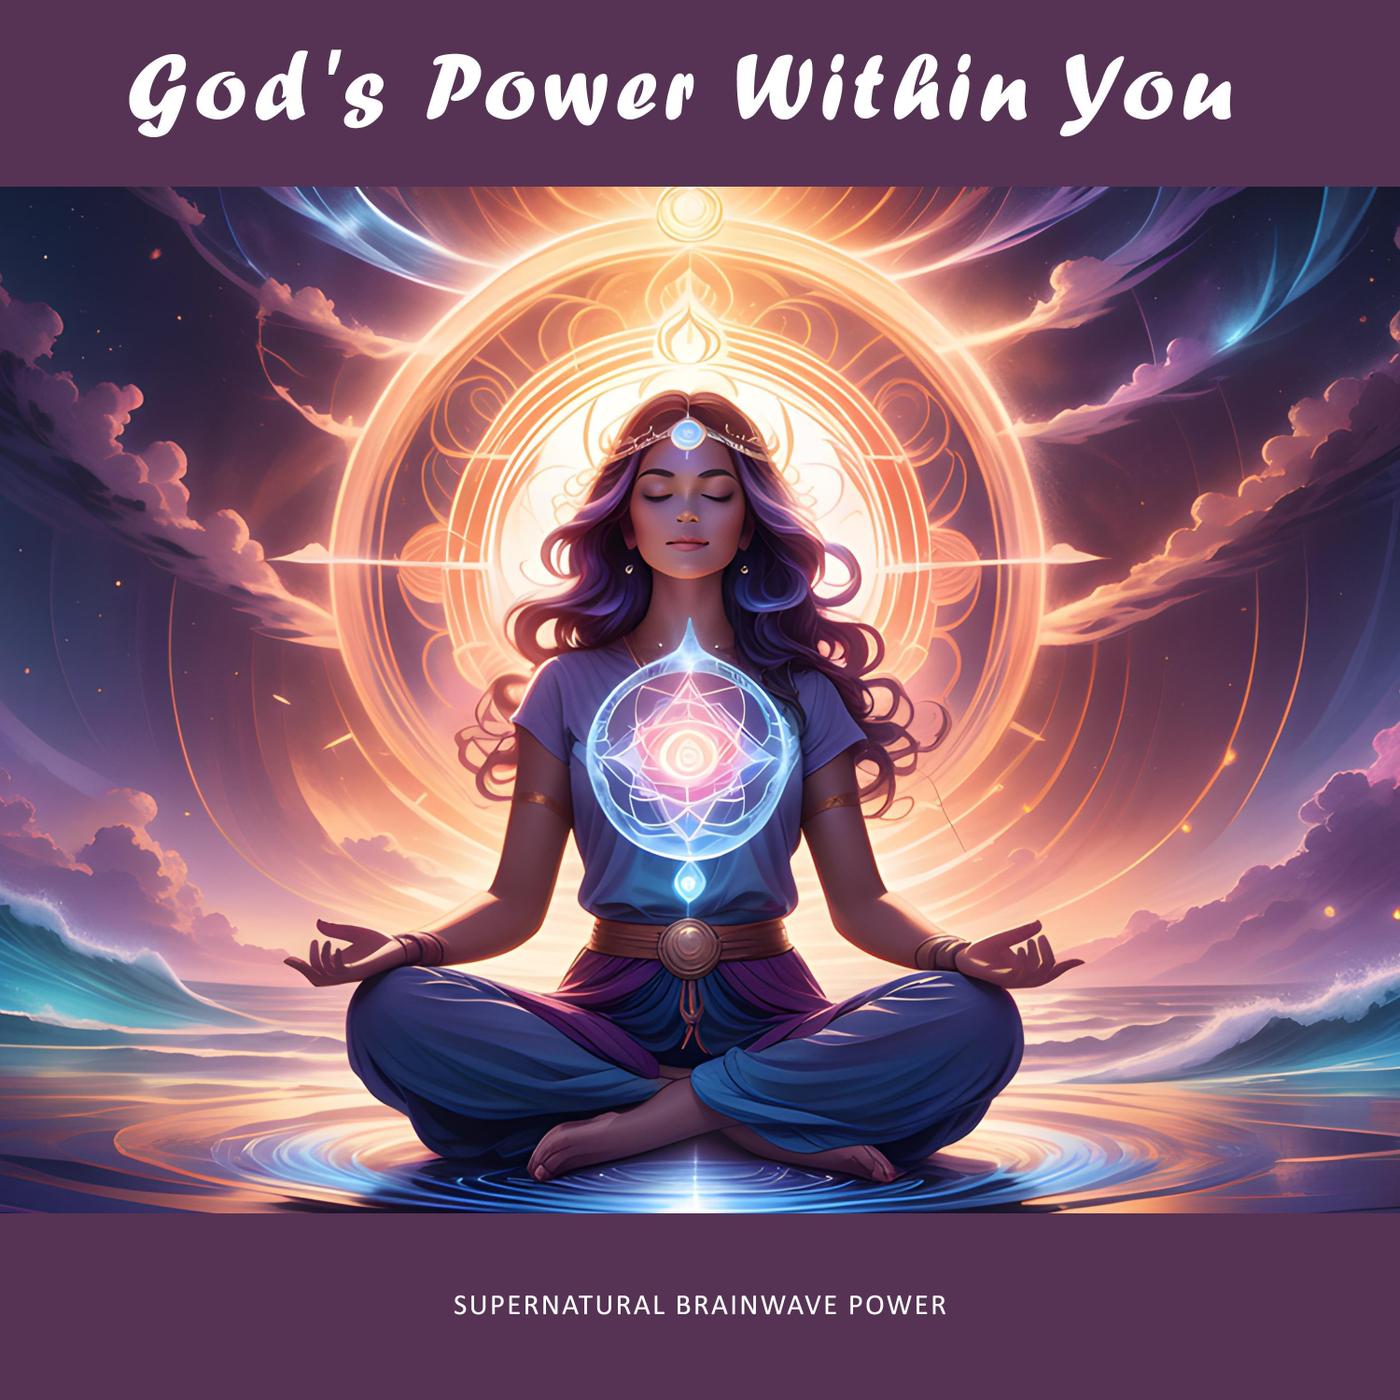 Supernatural Brainwave Power - Ask & You Will Receive